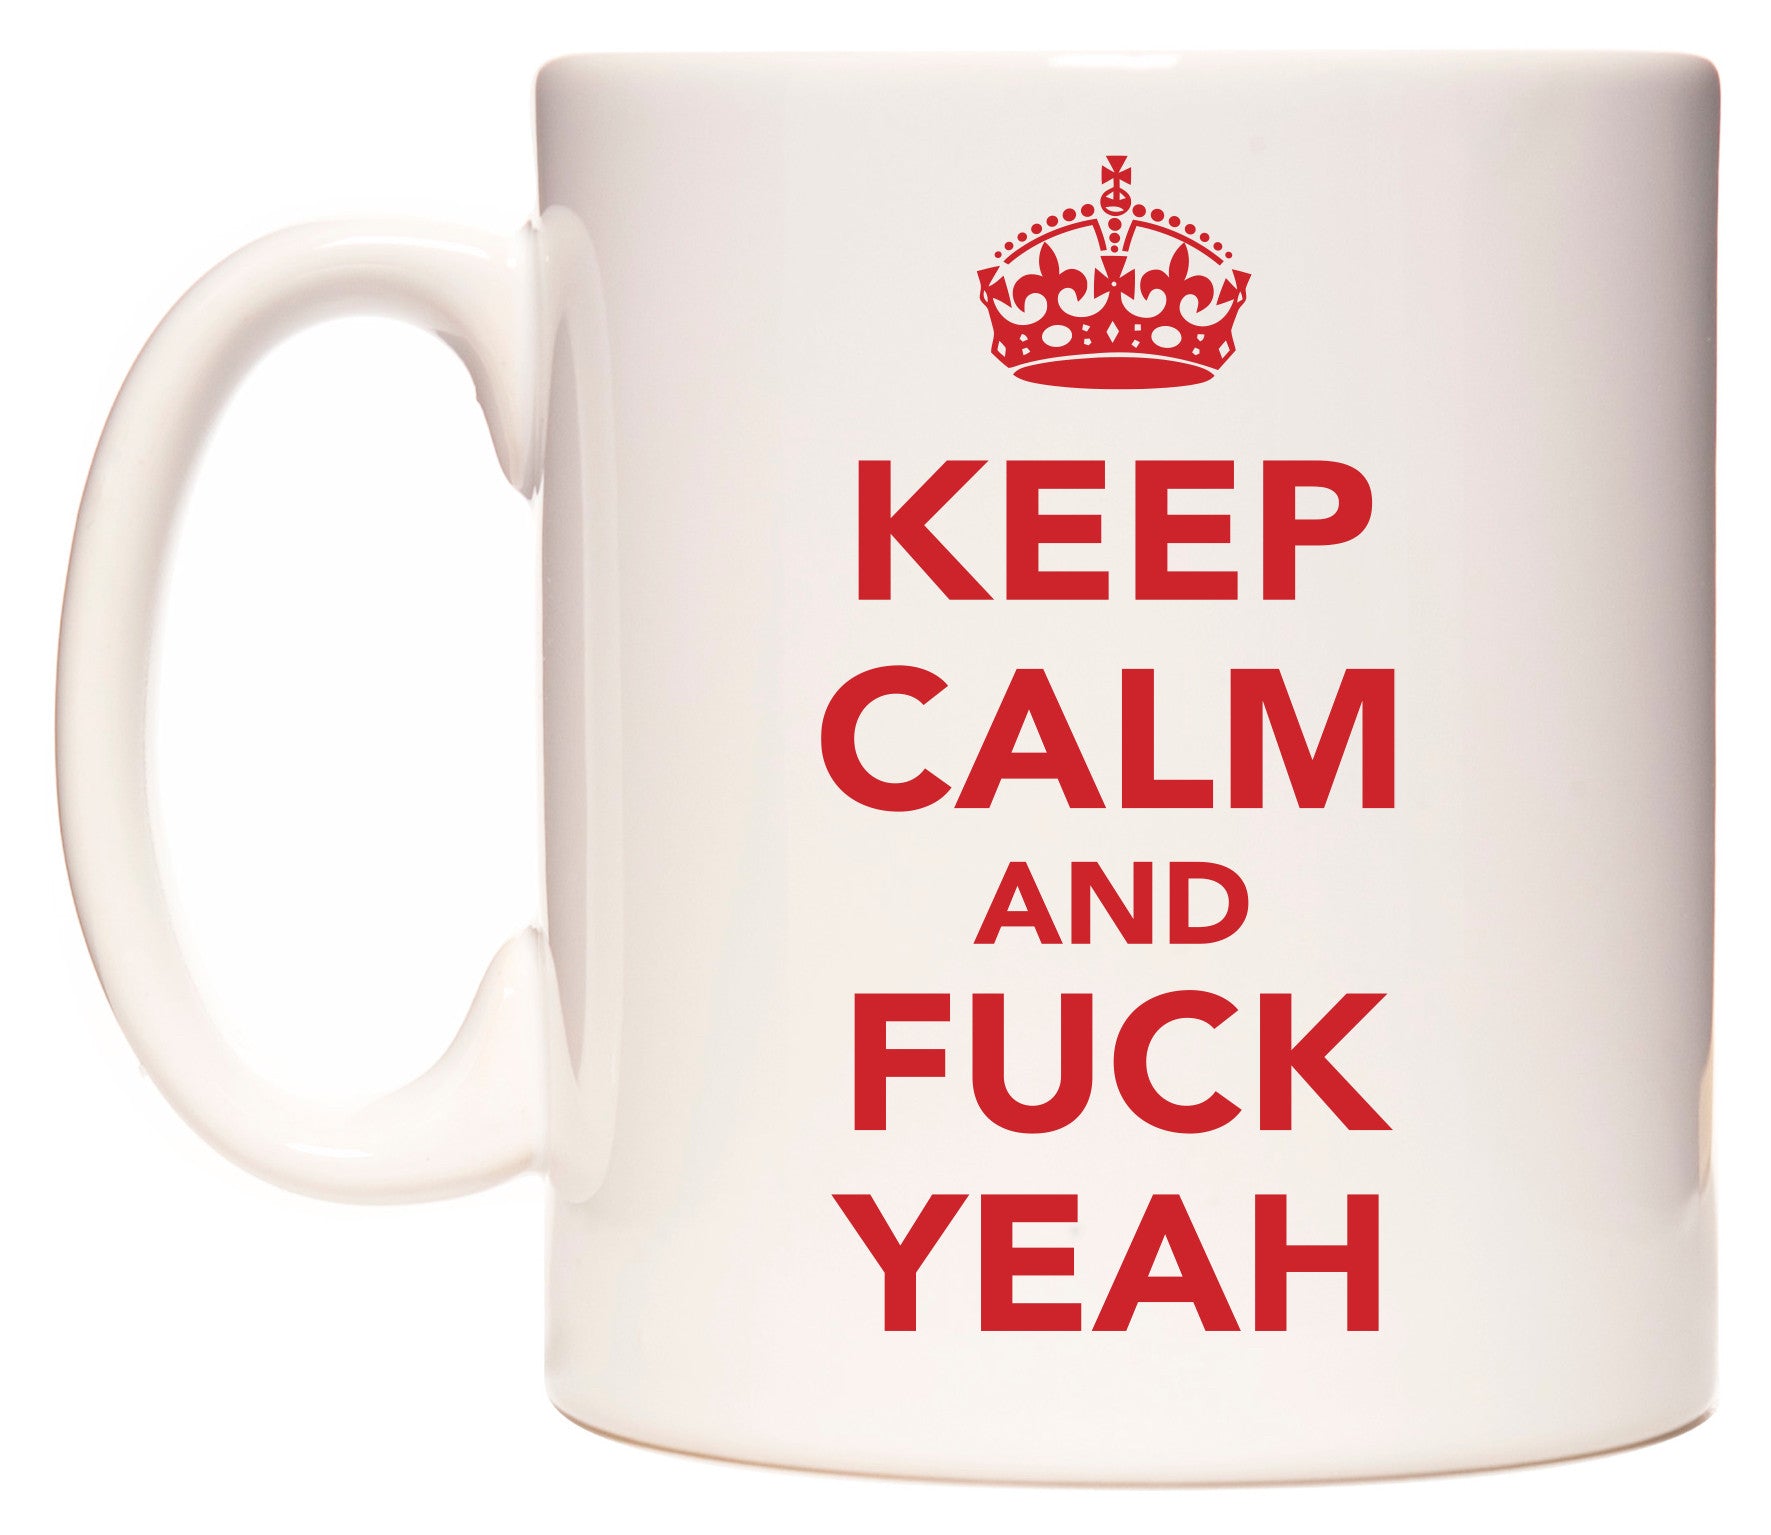 This mug features KEEP CALM AND F**K YEAH